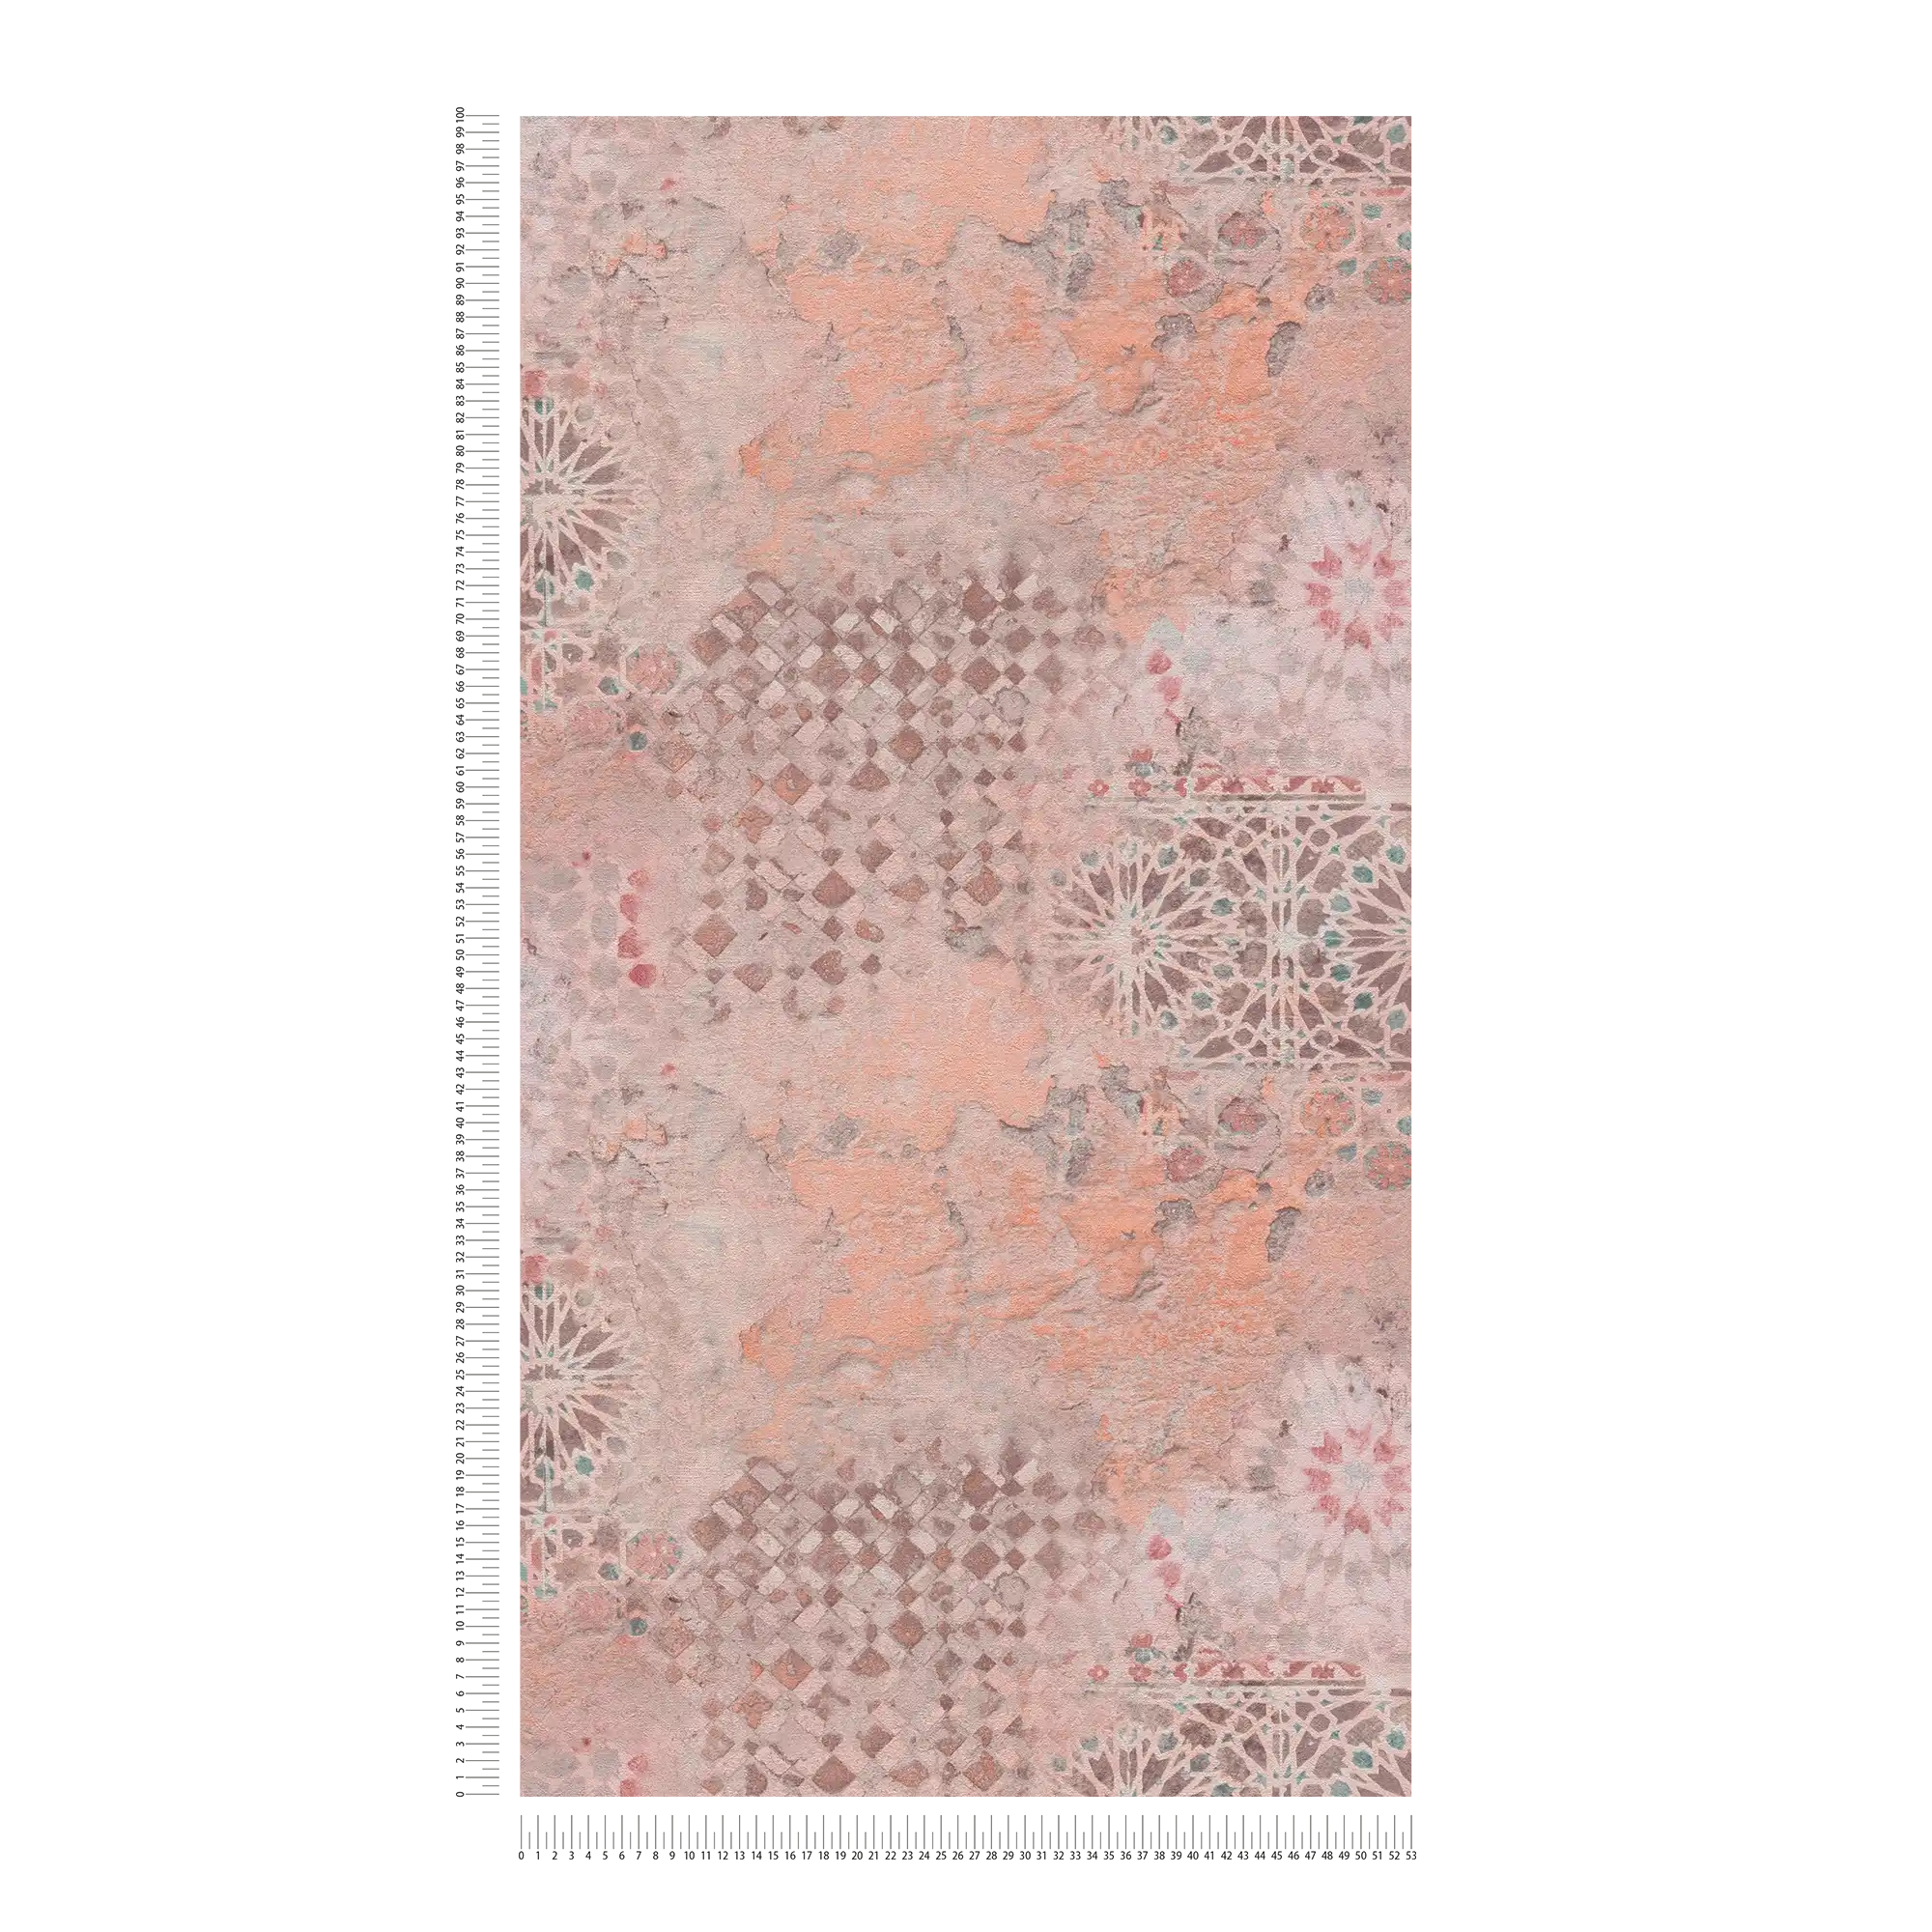             Colorful non-woven wallpaper with rustic mosaic pattern - brown, grey, orange
        